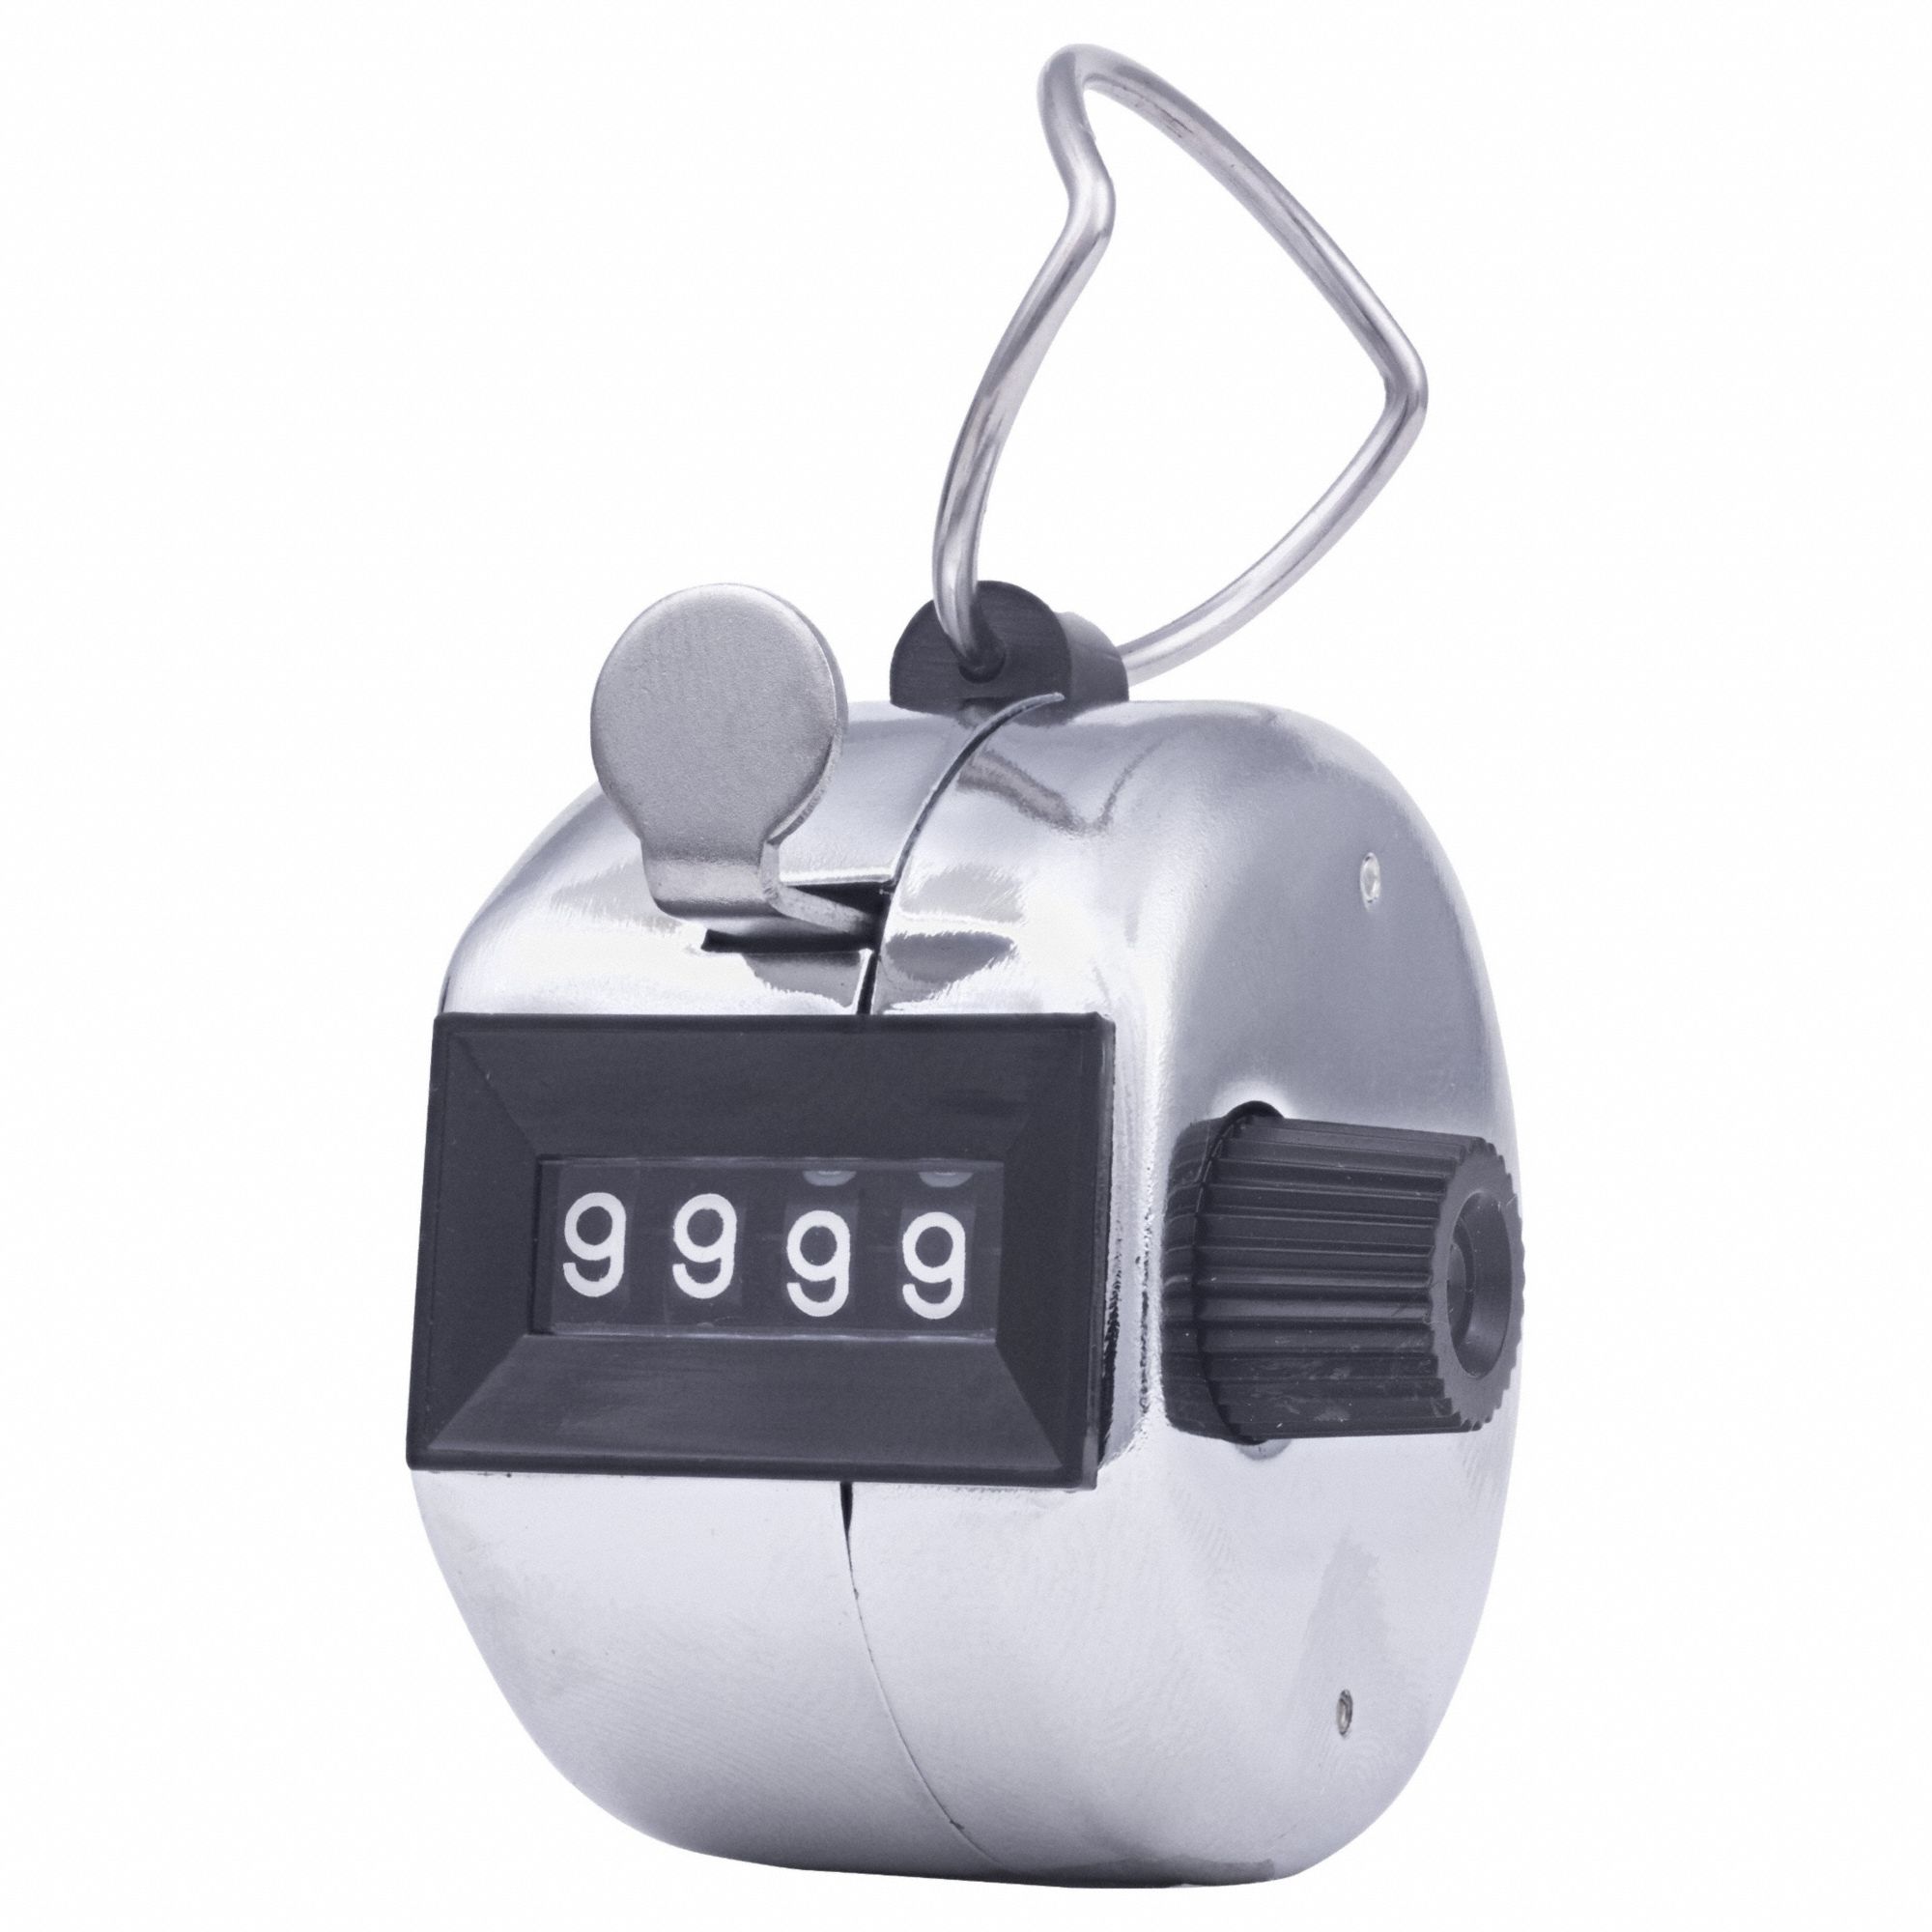 Mechanical Tally Counter: 4 Digits, Hand Held, Knob, White Digits, Black Background